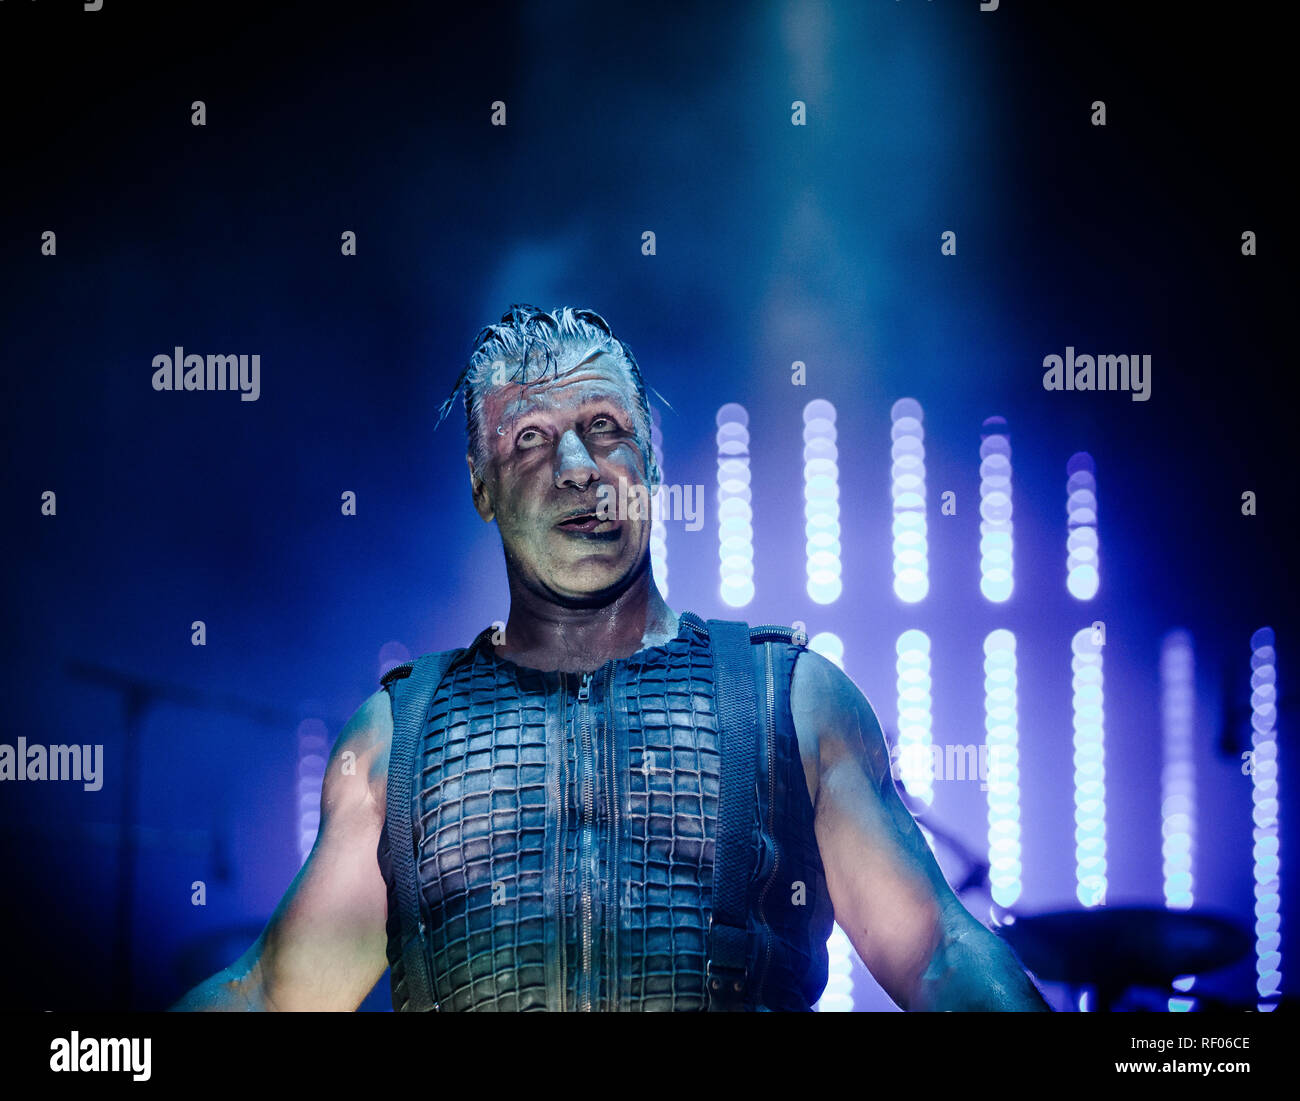 Rammstein, the German industrial metal band, performs a live concert at the  Danish music festival Tinderbox 2016 in Odense. Here the band's  characteristic vocalist Till Lindemann is seen live on stage. Denmark,